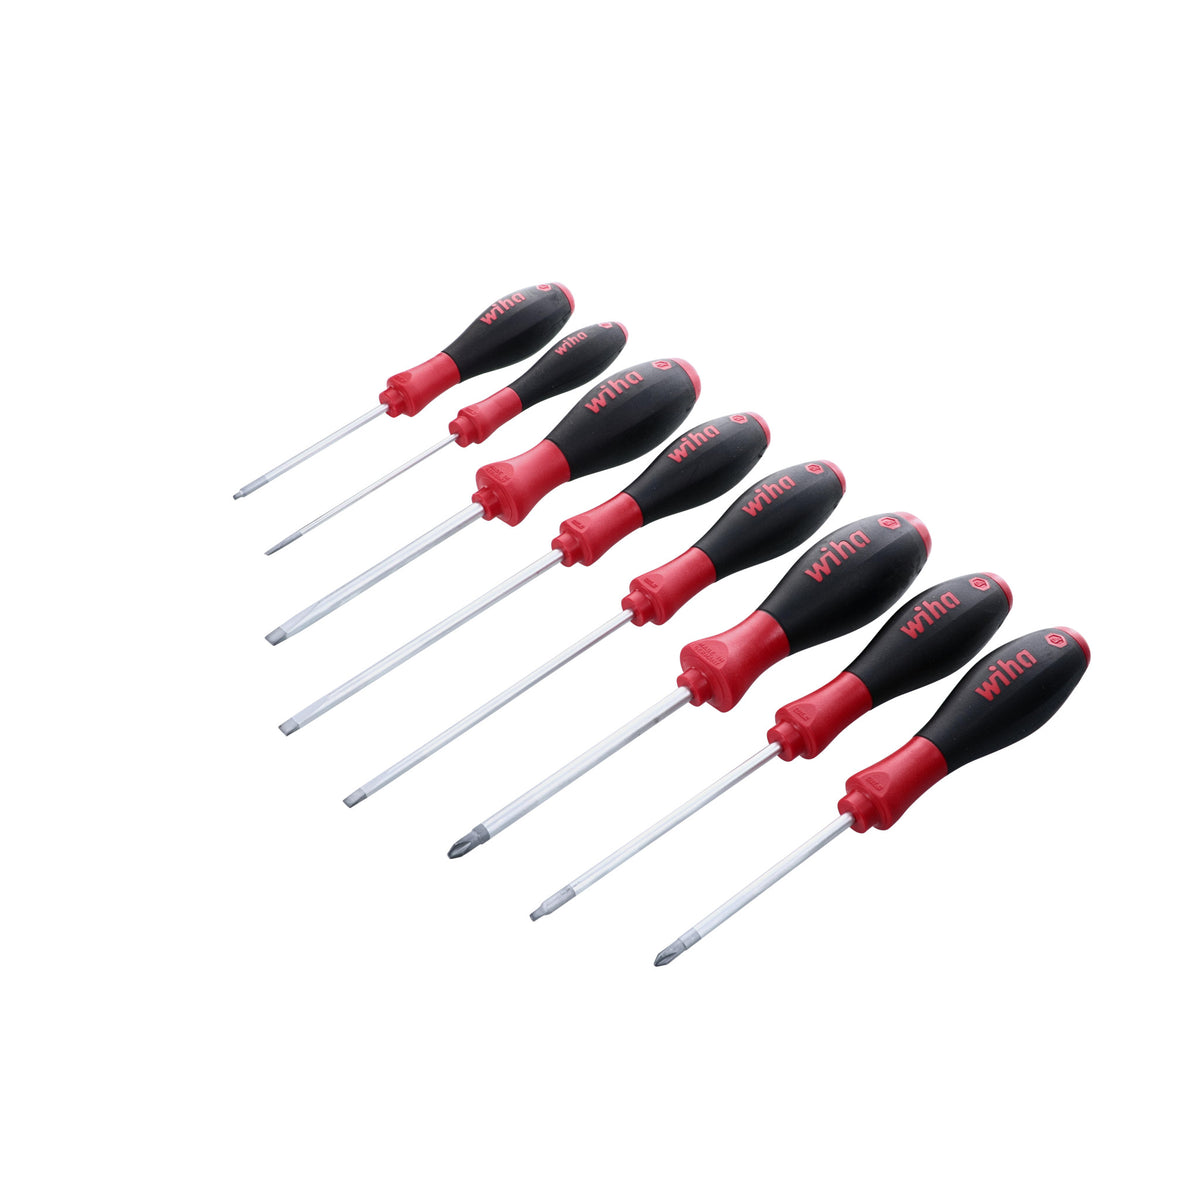 Wiha 30289 8 Piece SoftFinish Slotted and Phillips and Square Screwdriver Set